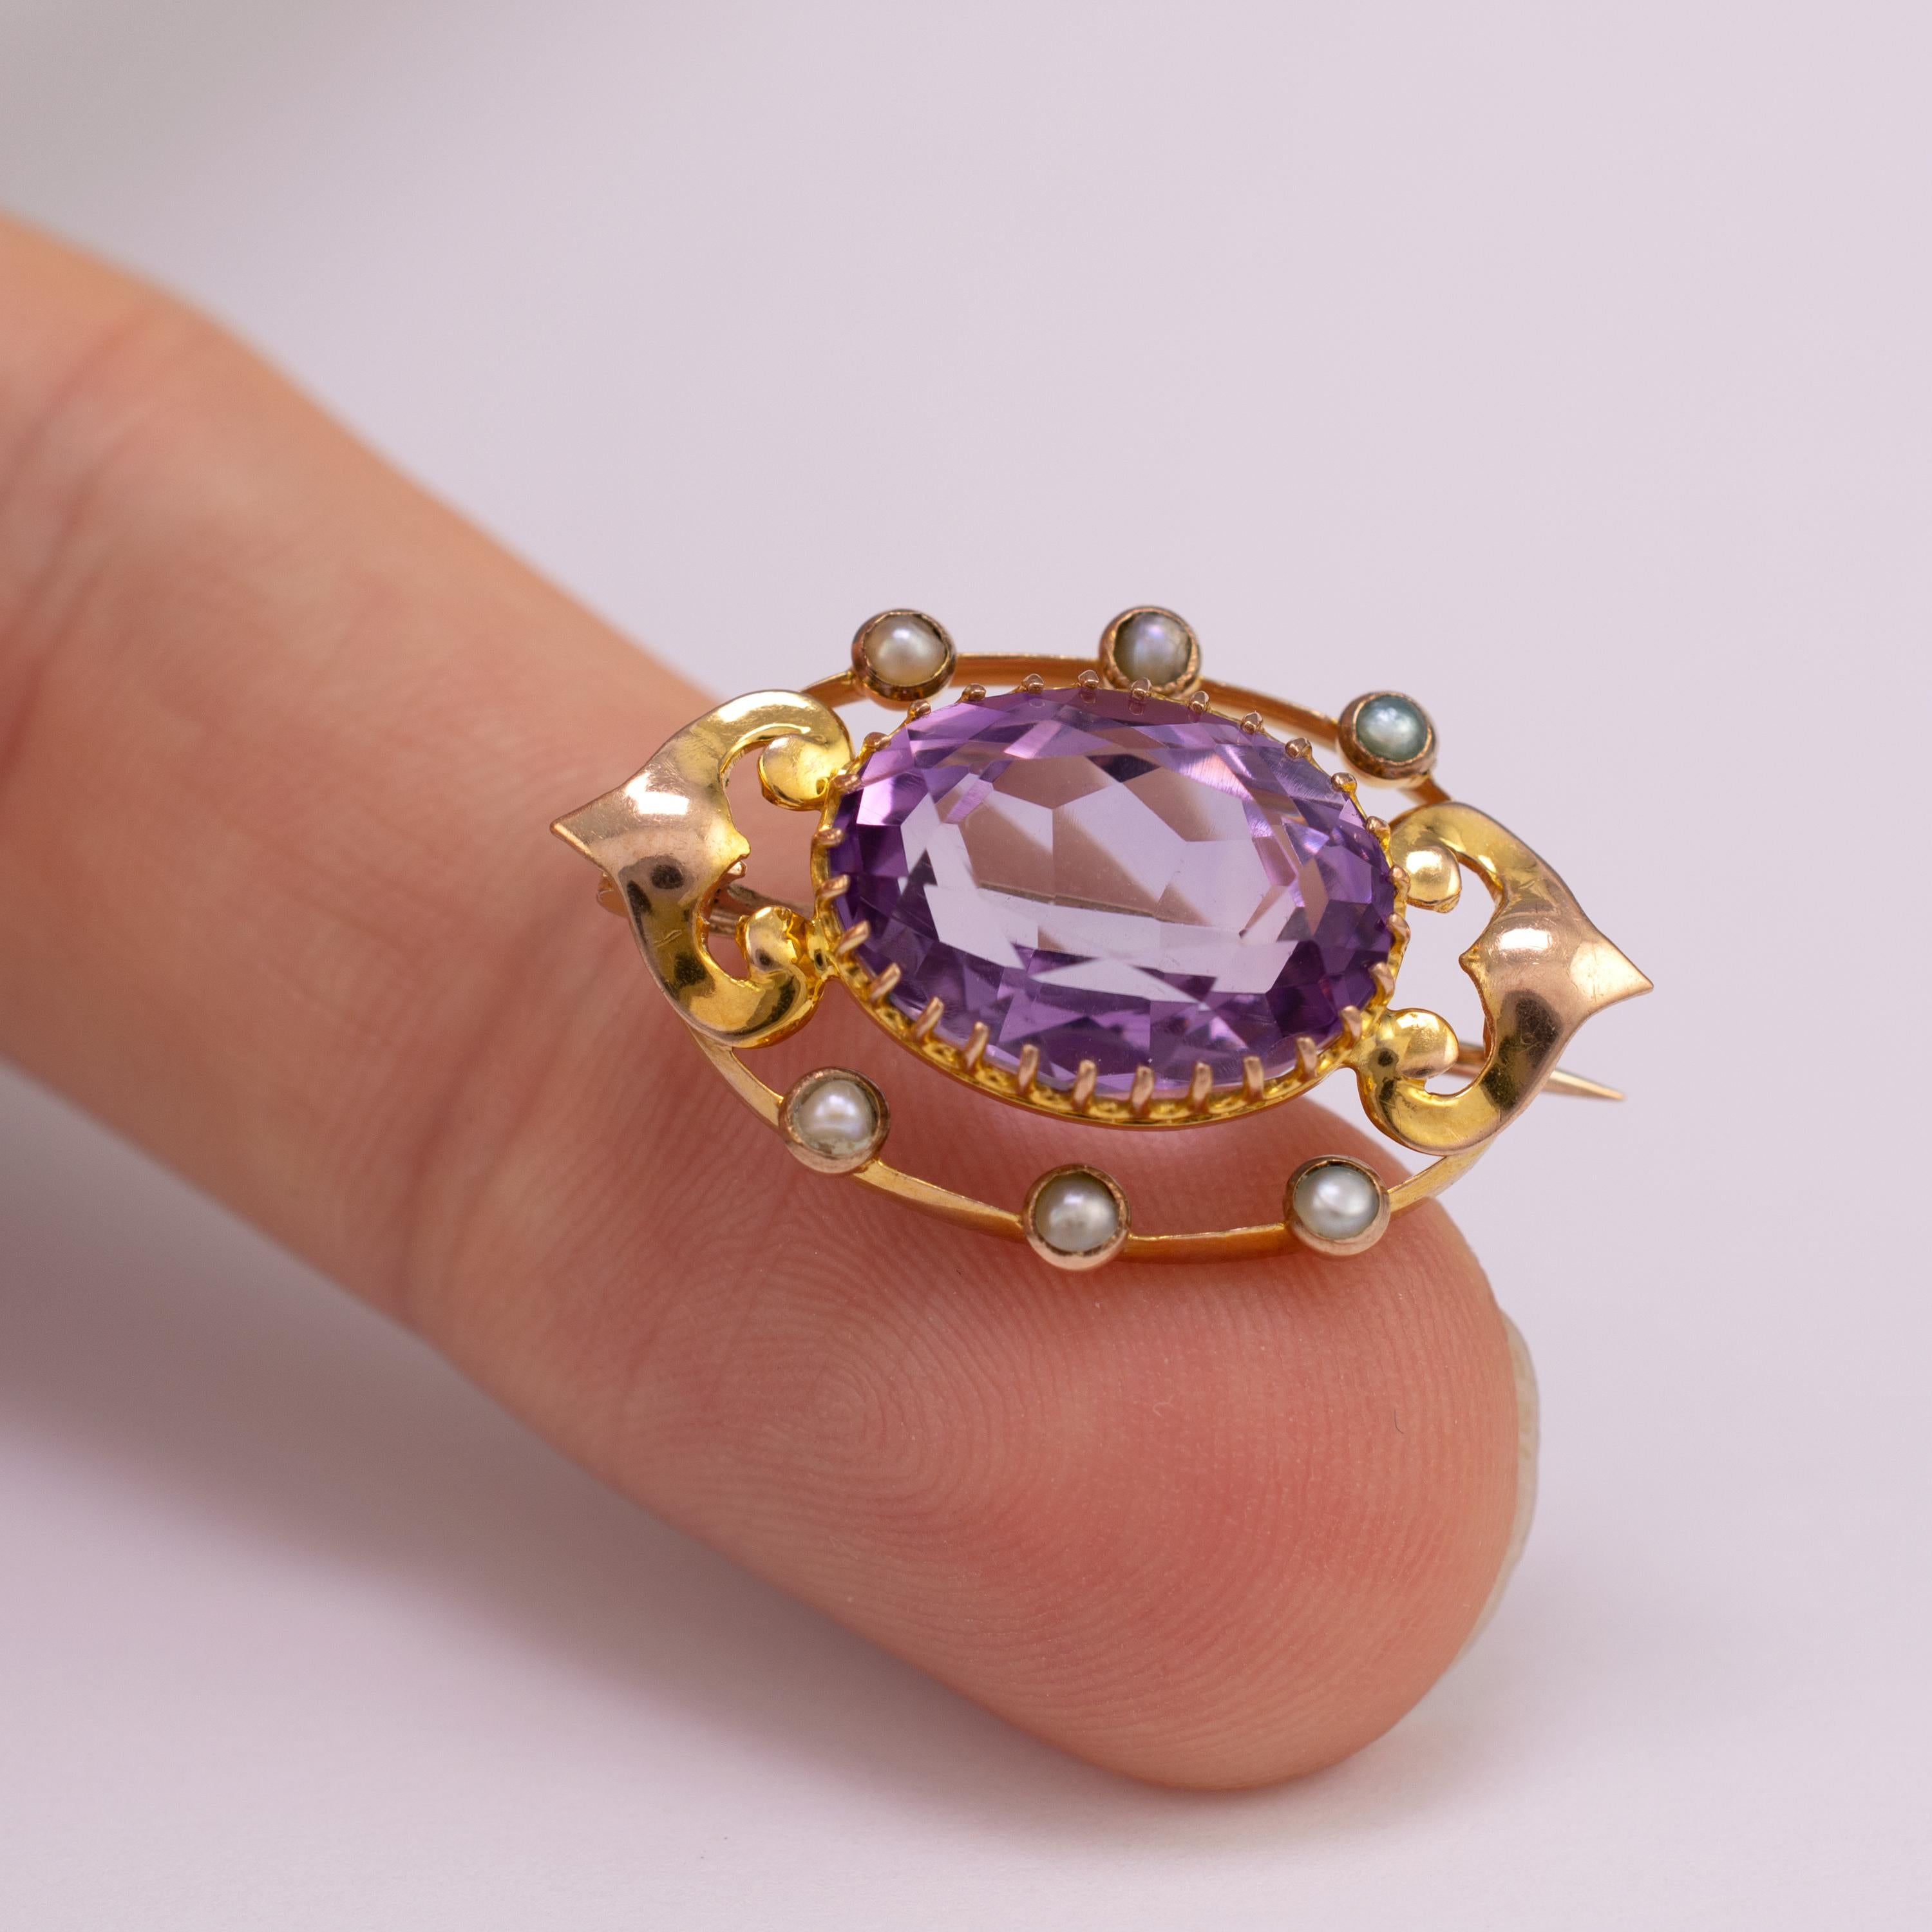 An exquisite Art Nouveau lace pin brooch with amethyst and pearls, Circa 1900

Lace pins were used in the Victorian and Edwardian periods on the collar. This example boasts an oval shape crown set pale amethyst stone of the highest quality. There